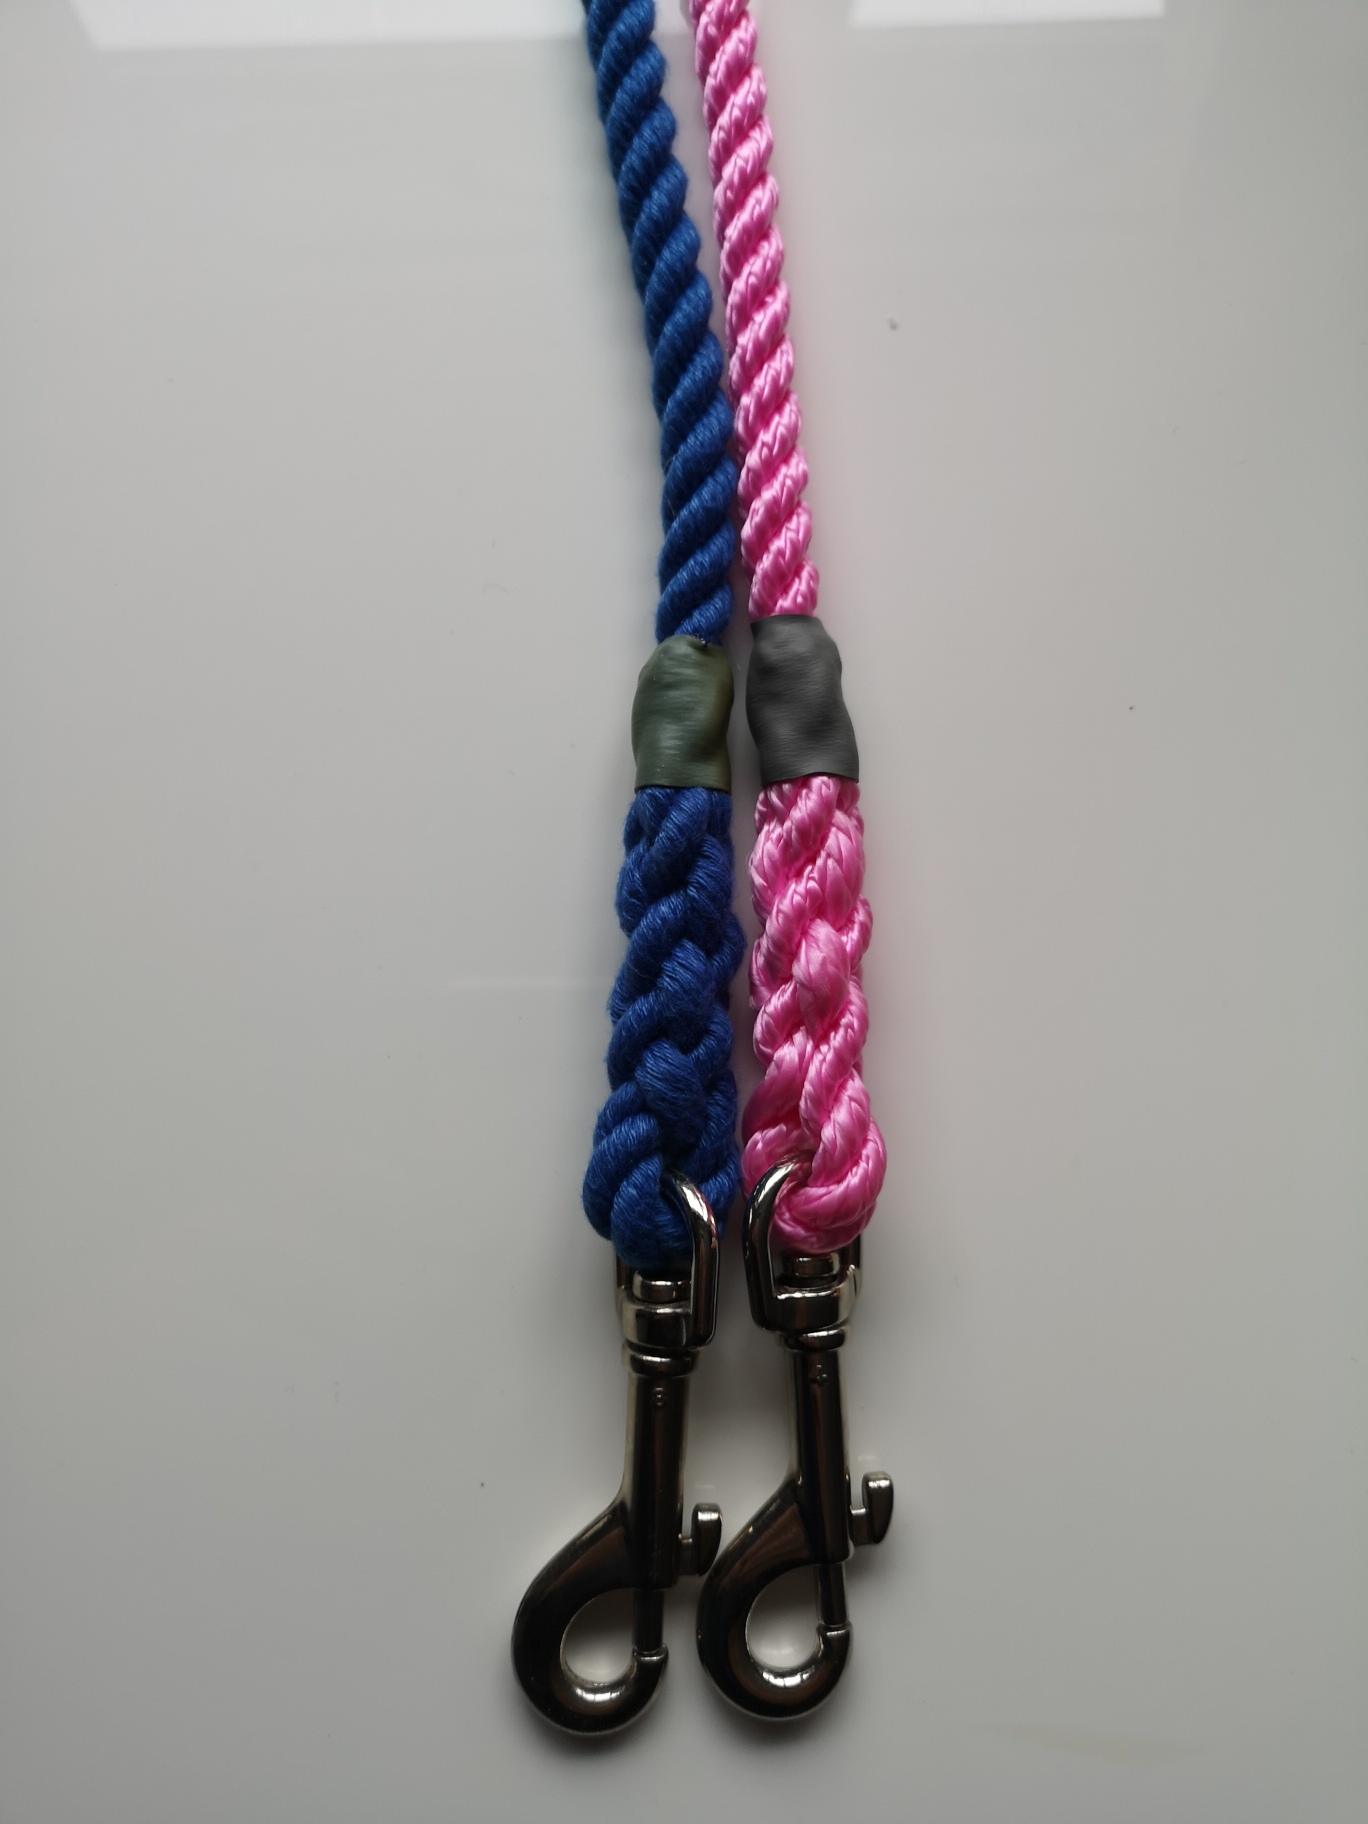 LEADS - Rope Lead